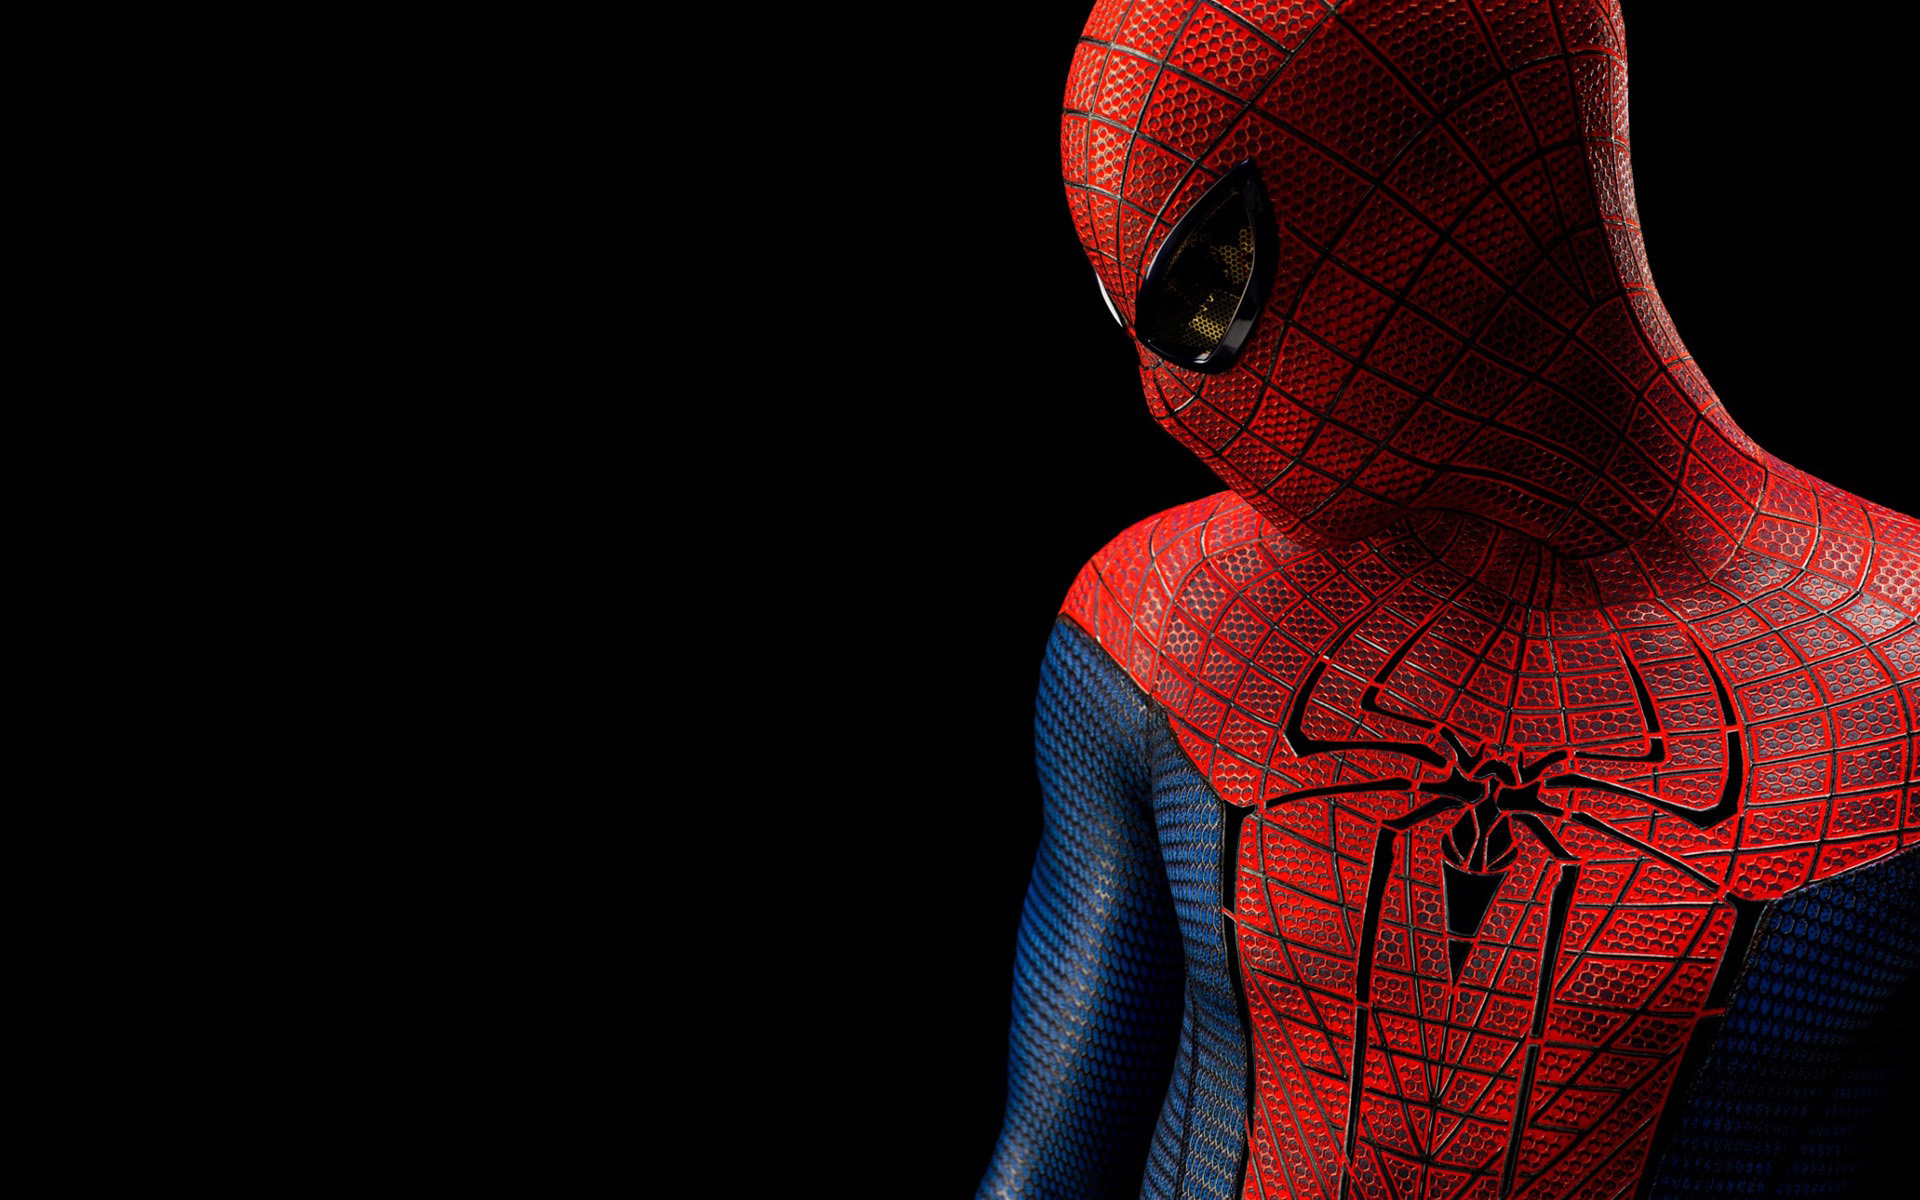 The Amazing Spider Man Wallpaper HDthe